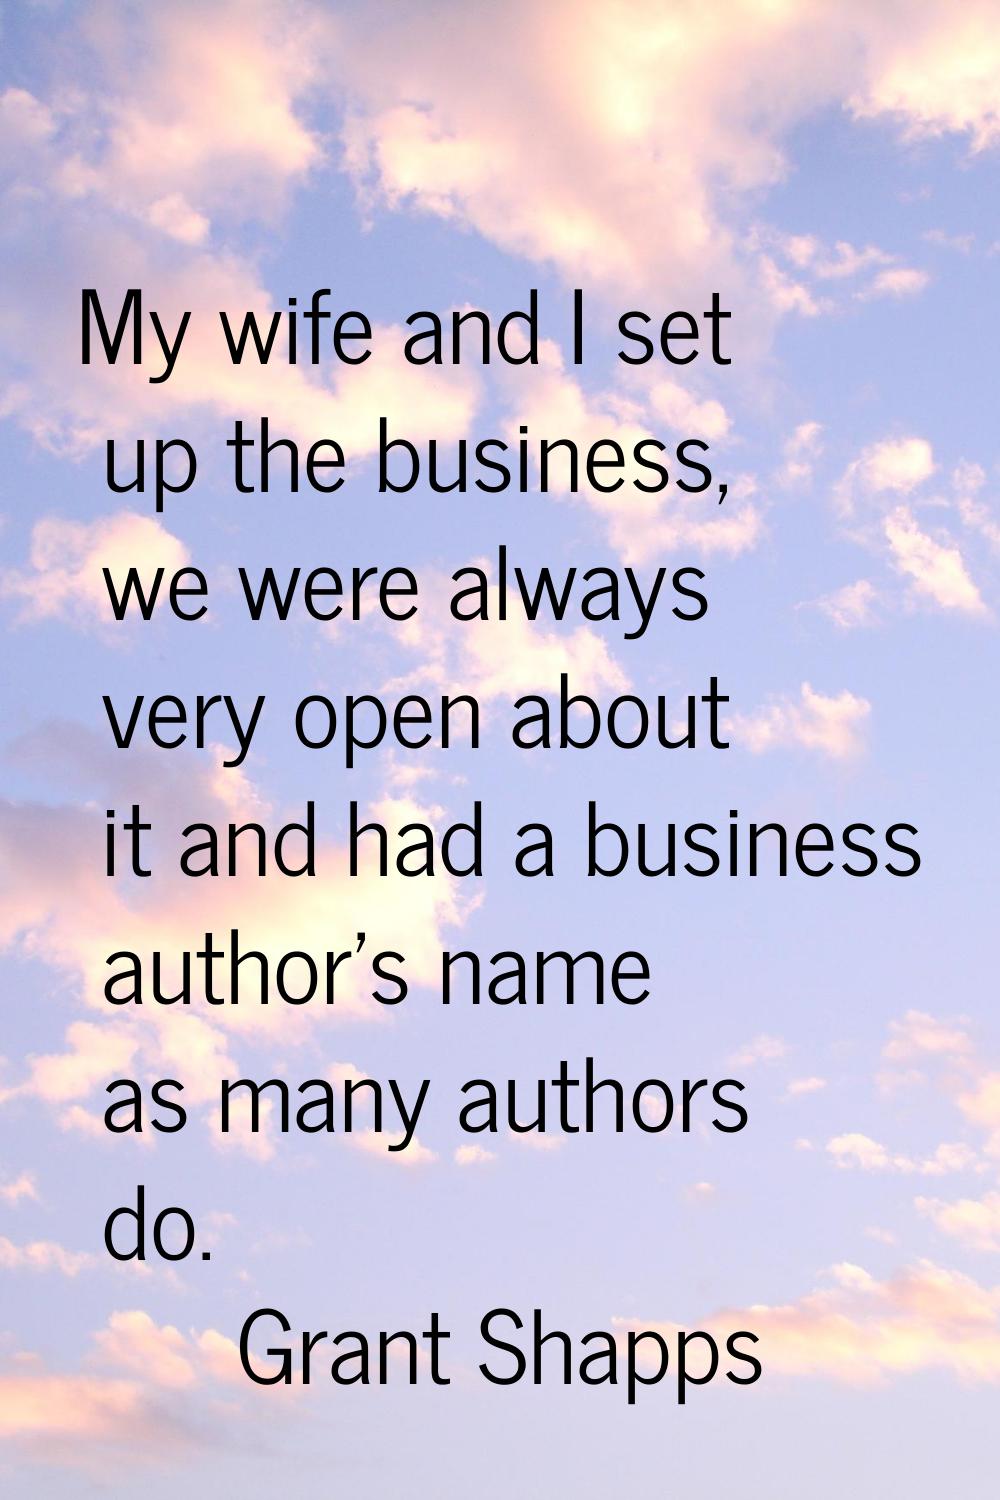 My wife and I set up the business, we were always very open about it and had a business author's na